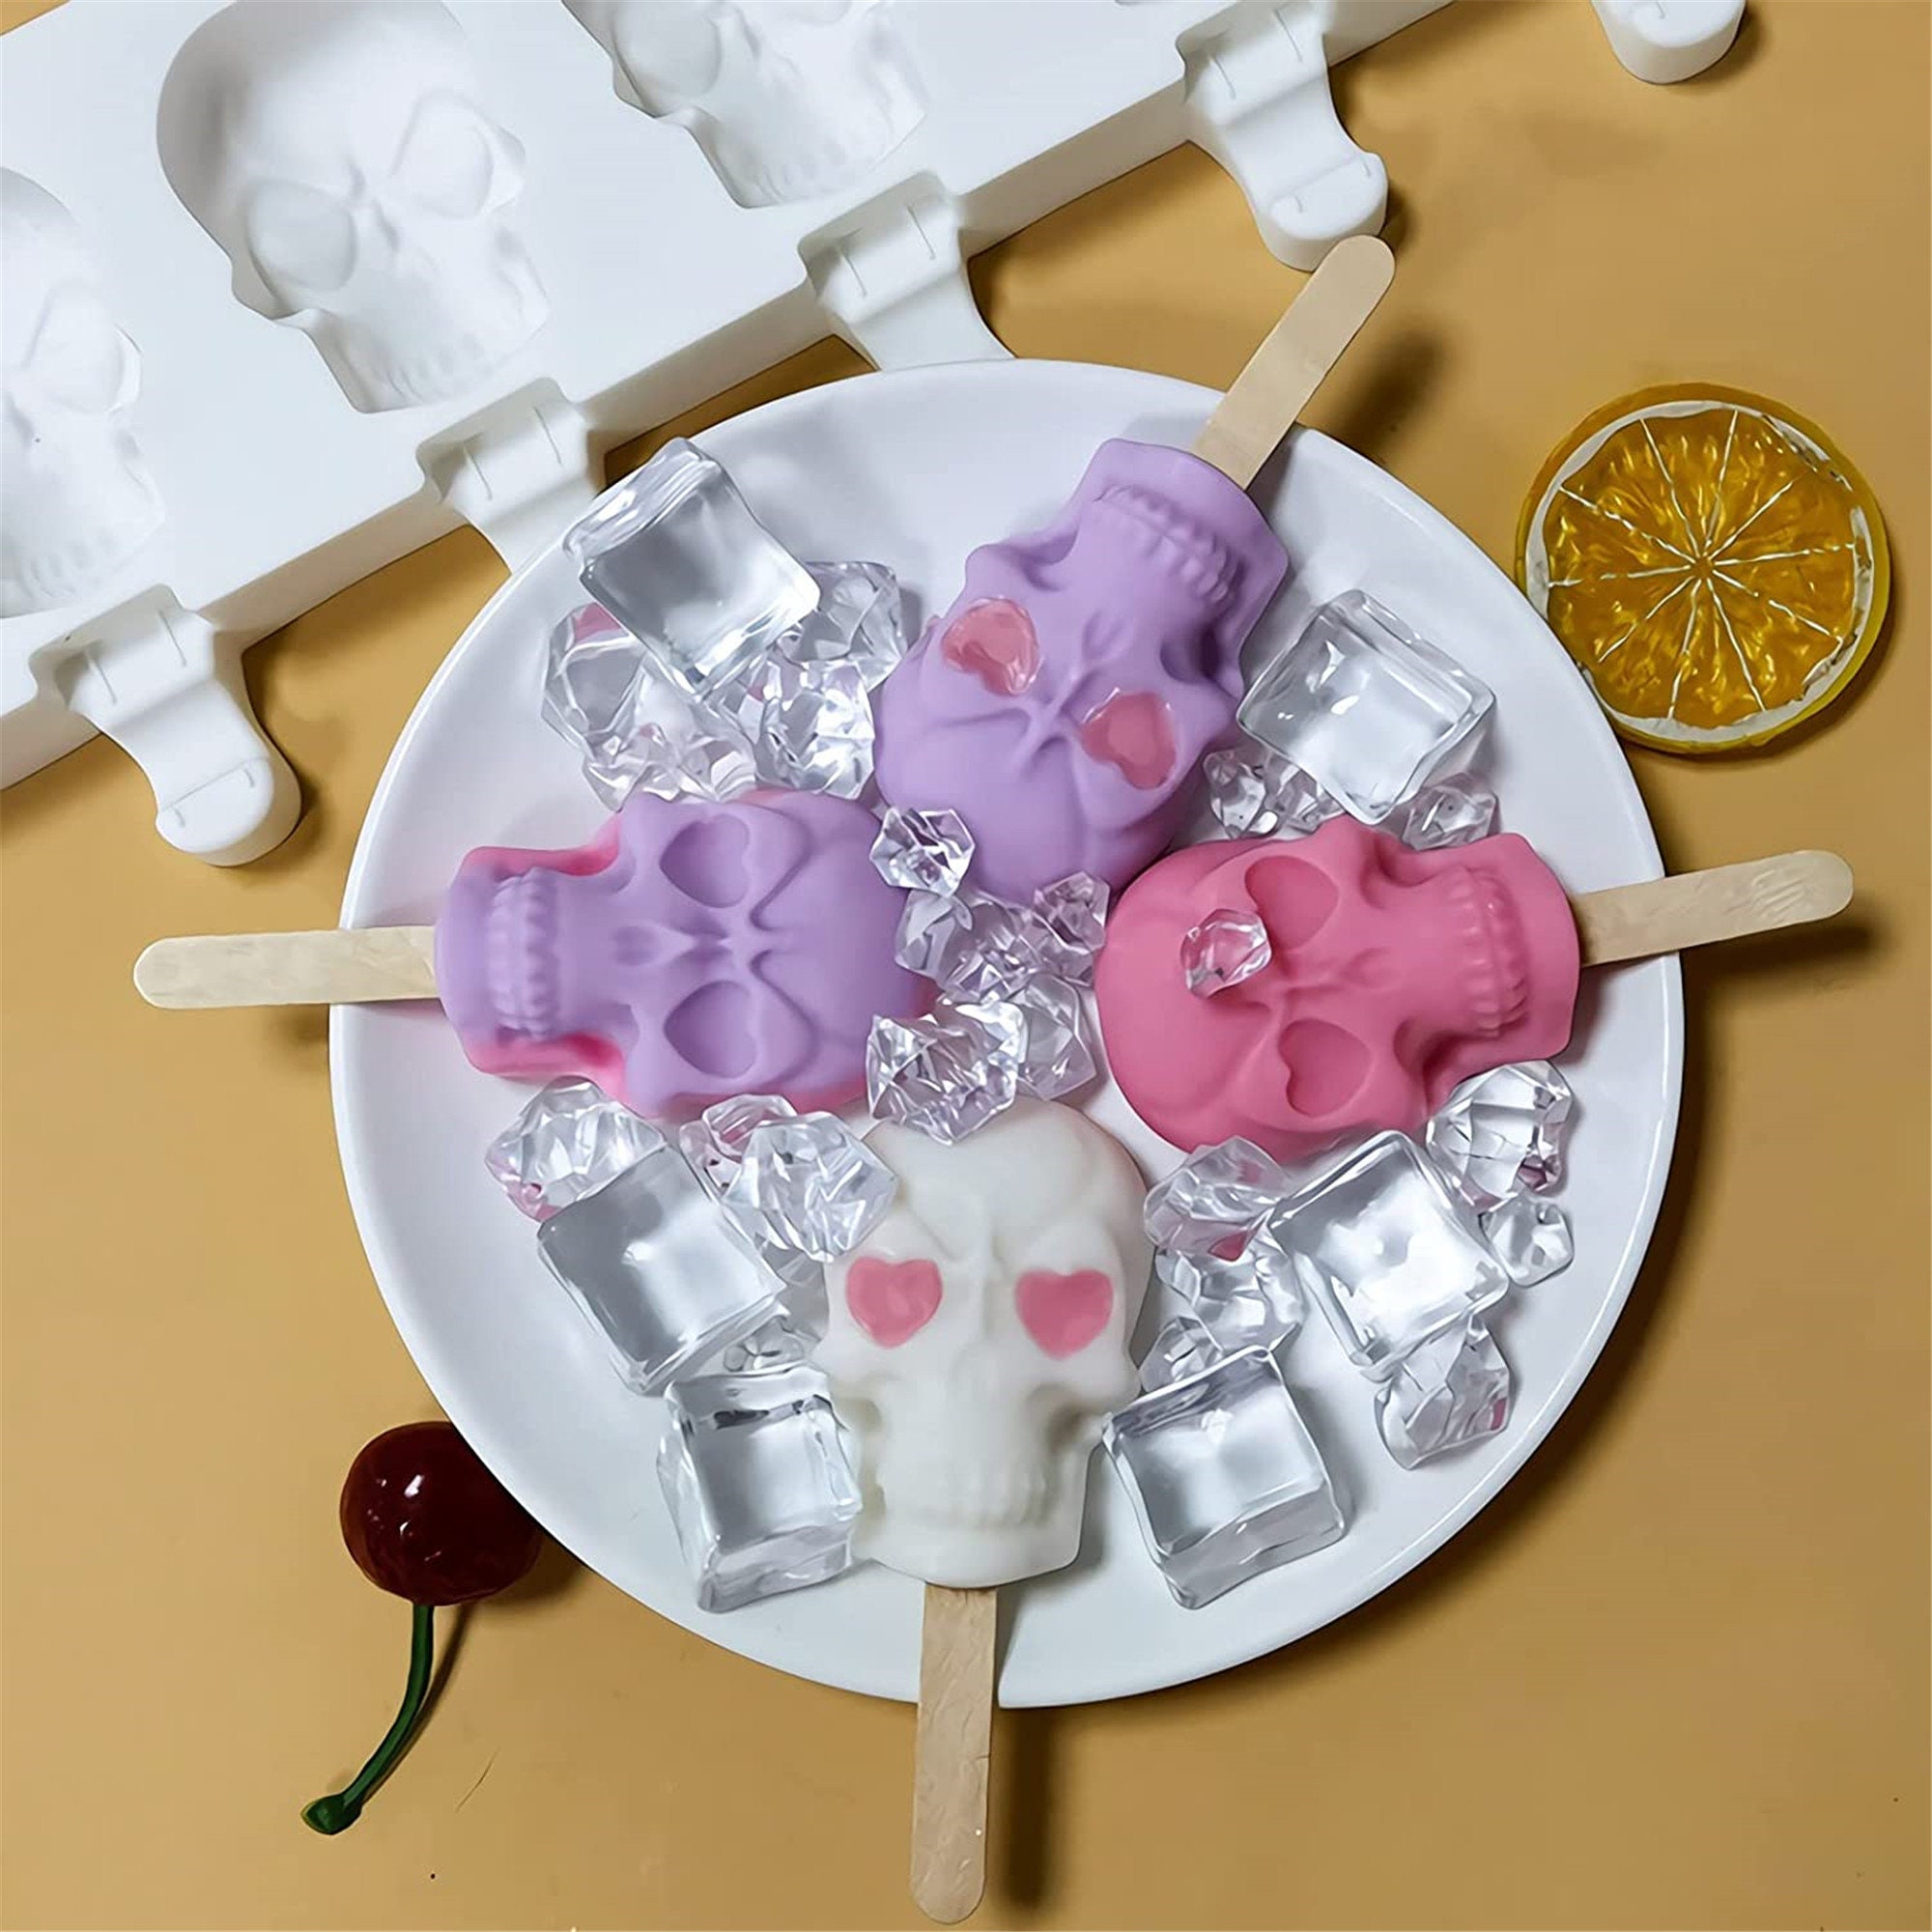  Shaped Popsicle Molds Cute Heart Shape Ice Pop Molds Silicone 4  Cavities Popsicle Moulds for Kids Adults Ice Cream Mold Cake Pop Molds  Homemade Popsicle Silicone Molds DIY Popsicle Maker: Home